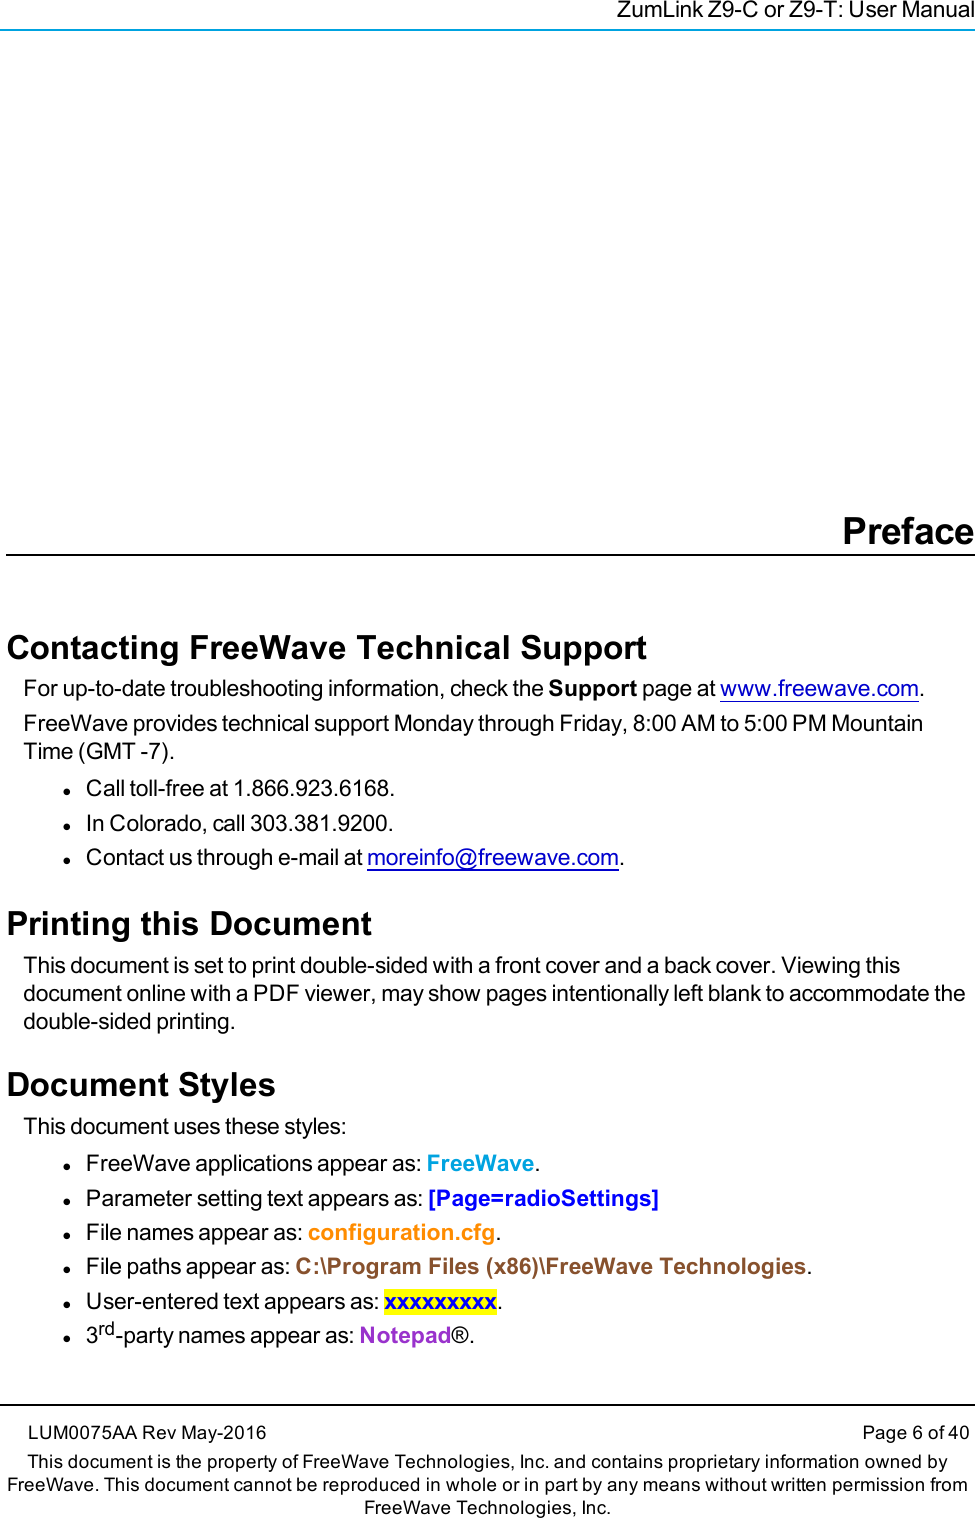 ZumLink Z9-C or Z9-T: User ManualPrefaceContacting FreeWave Technical SupportFor up-to-date troubleshooting information, check the Support page at www.freewave.com.FreeWave provides technical support Monday through Friday, 8:00 AM to 5:00 PM MountainTime (GMT -7).lCall toll-free at 1.866.923.6168.lIn Colorado, call 303.381.9200.lContact us through e-mail at moreinfo@freewave.com.Printing this DocumentThis document is set to print double-sided with a front cover and a back cover. Viewing thisdocument online with a PDF viewer, may show pages intentionally left blank to accommodate thedouble-sided printing.Document StylesThis document uses these styles:lFreeWave applications appear as: FreeWave.lParameter setting text appears as: [Page=radioSettings]lFile names appear as: configuration.cfg.lFile paths appear as: C:\Program Files (x86)\FreeWave Technologies.lUser-entered text appears as: xxxxxxxxx.l3rd-party names appear as: Notepad®.LUM0075AA Rev May-2016 Page 6 of 40This document is the property of FreeWave Technologies, Inc. and contains proprietary information owned byFreeWave. This document cannot be reproduced in whole or in part by any means without written permission fromFreeWave Technologies, Inc.